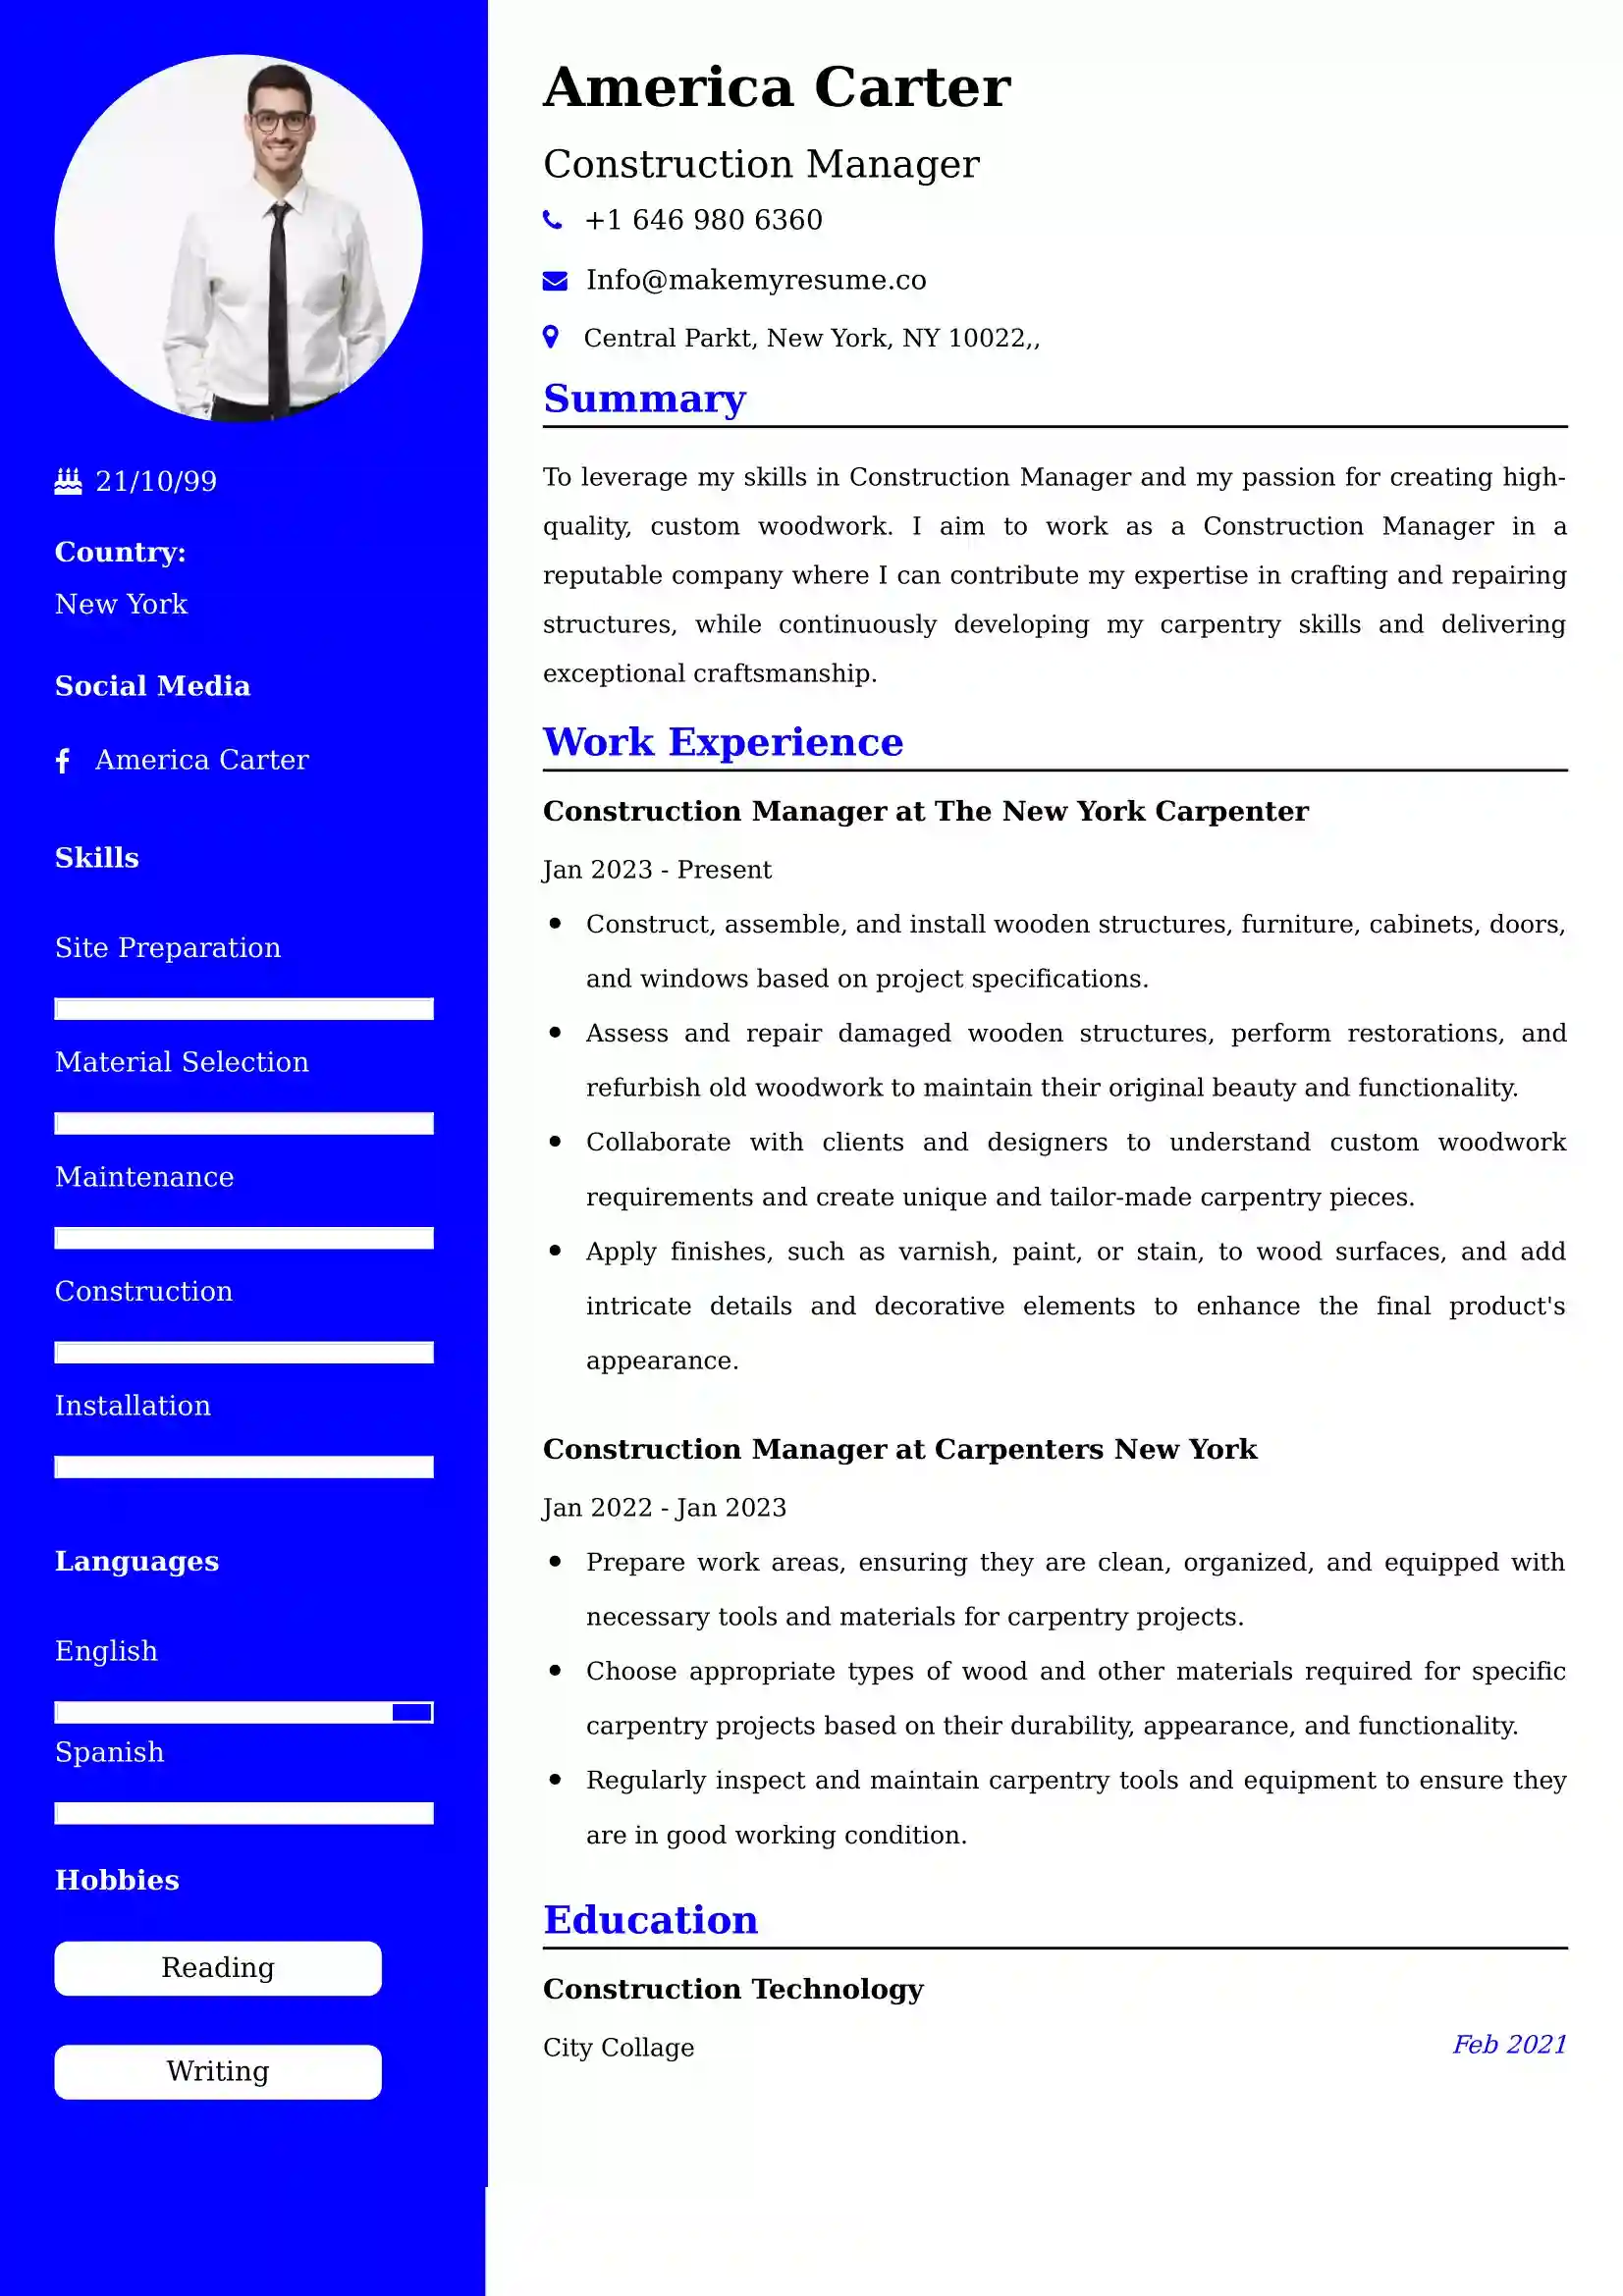 Construction Manager Resume Examples - Brazilian Format, Latest Template